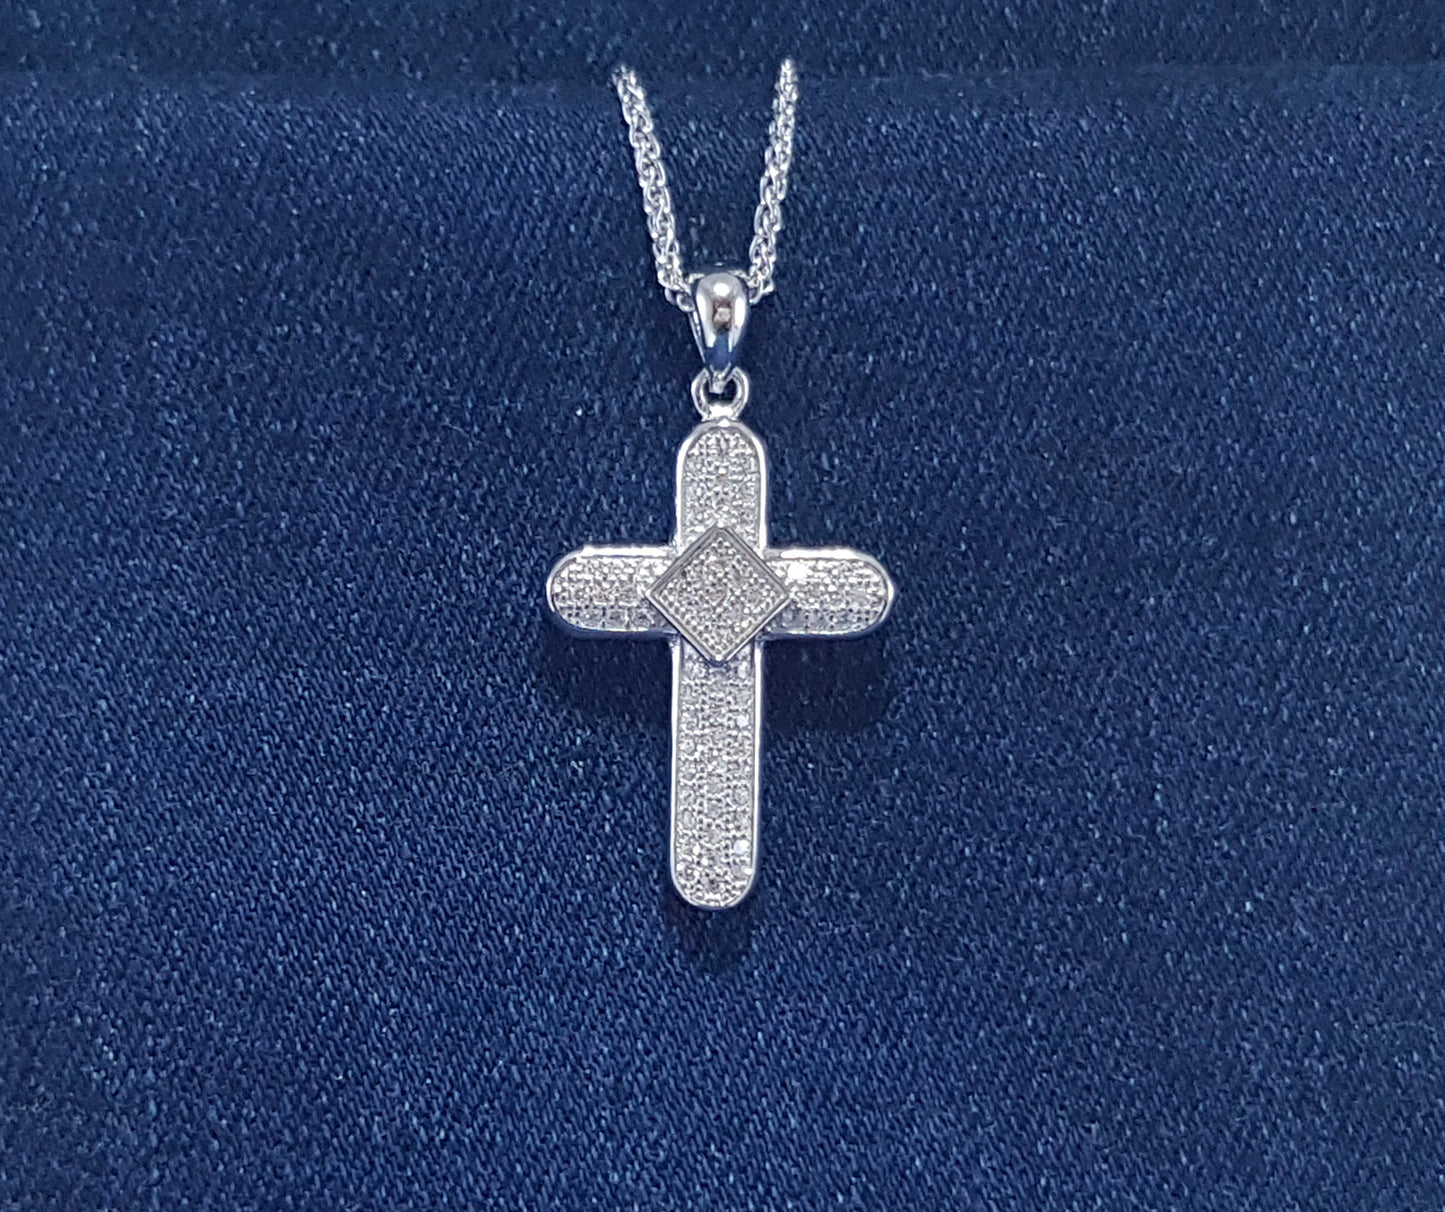 Sterling silver cross with cubic zirconia stones - rounded edges